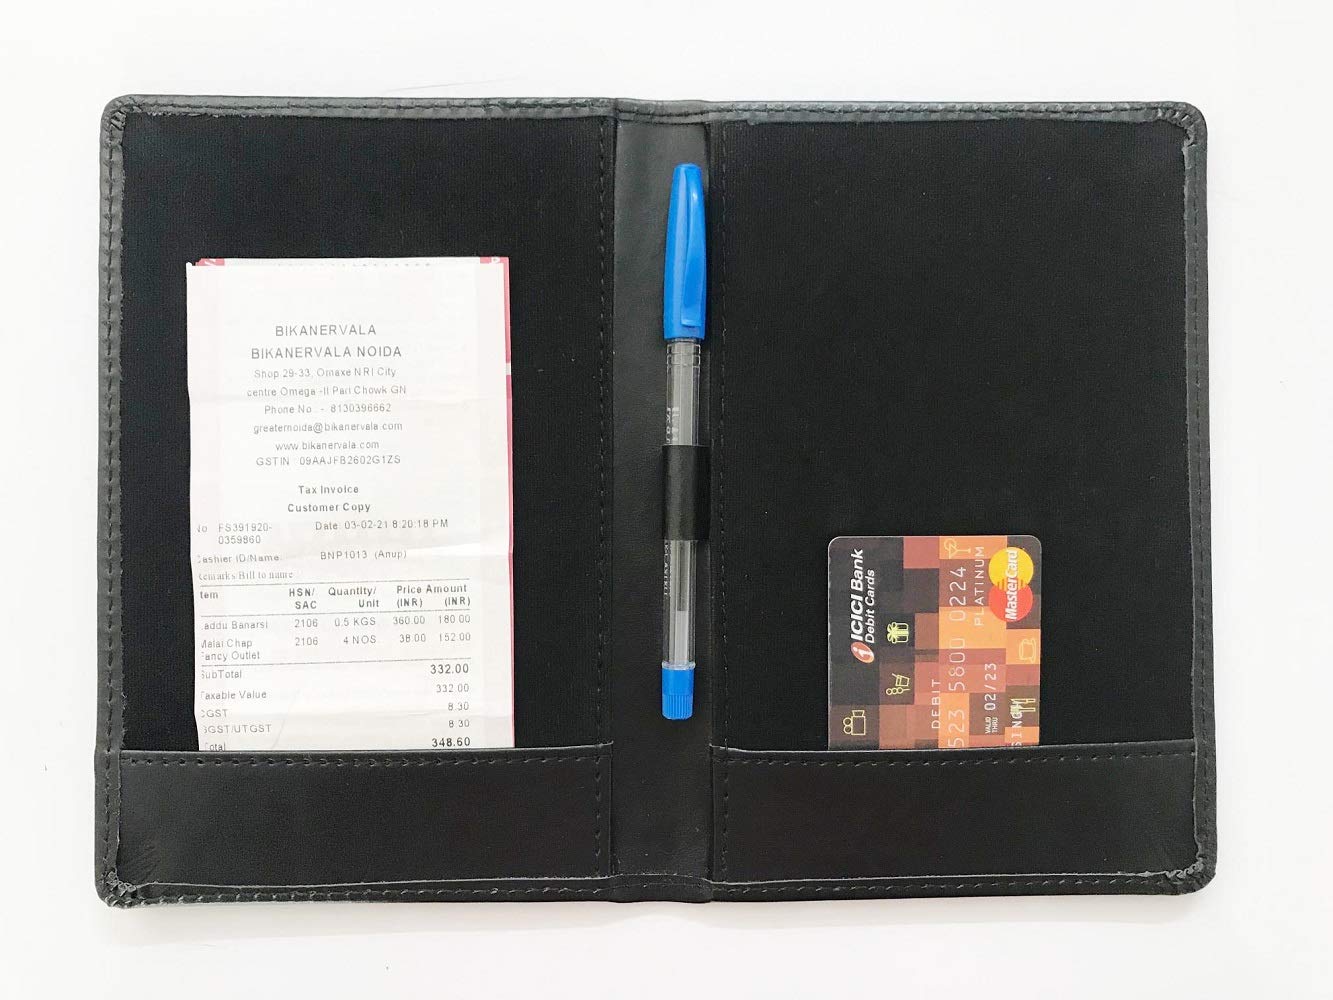 NJ Bill folder for hotel and Restaurant, Guest Check Presenter, Bill folder with Credit Card Pocket and Bill Receipt Pocket for Hotel and Restaurant (5.5x8 Inches) - BLACK LEATHER